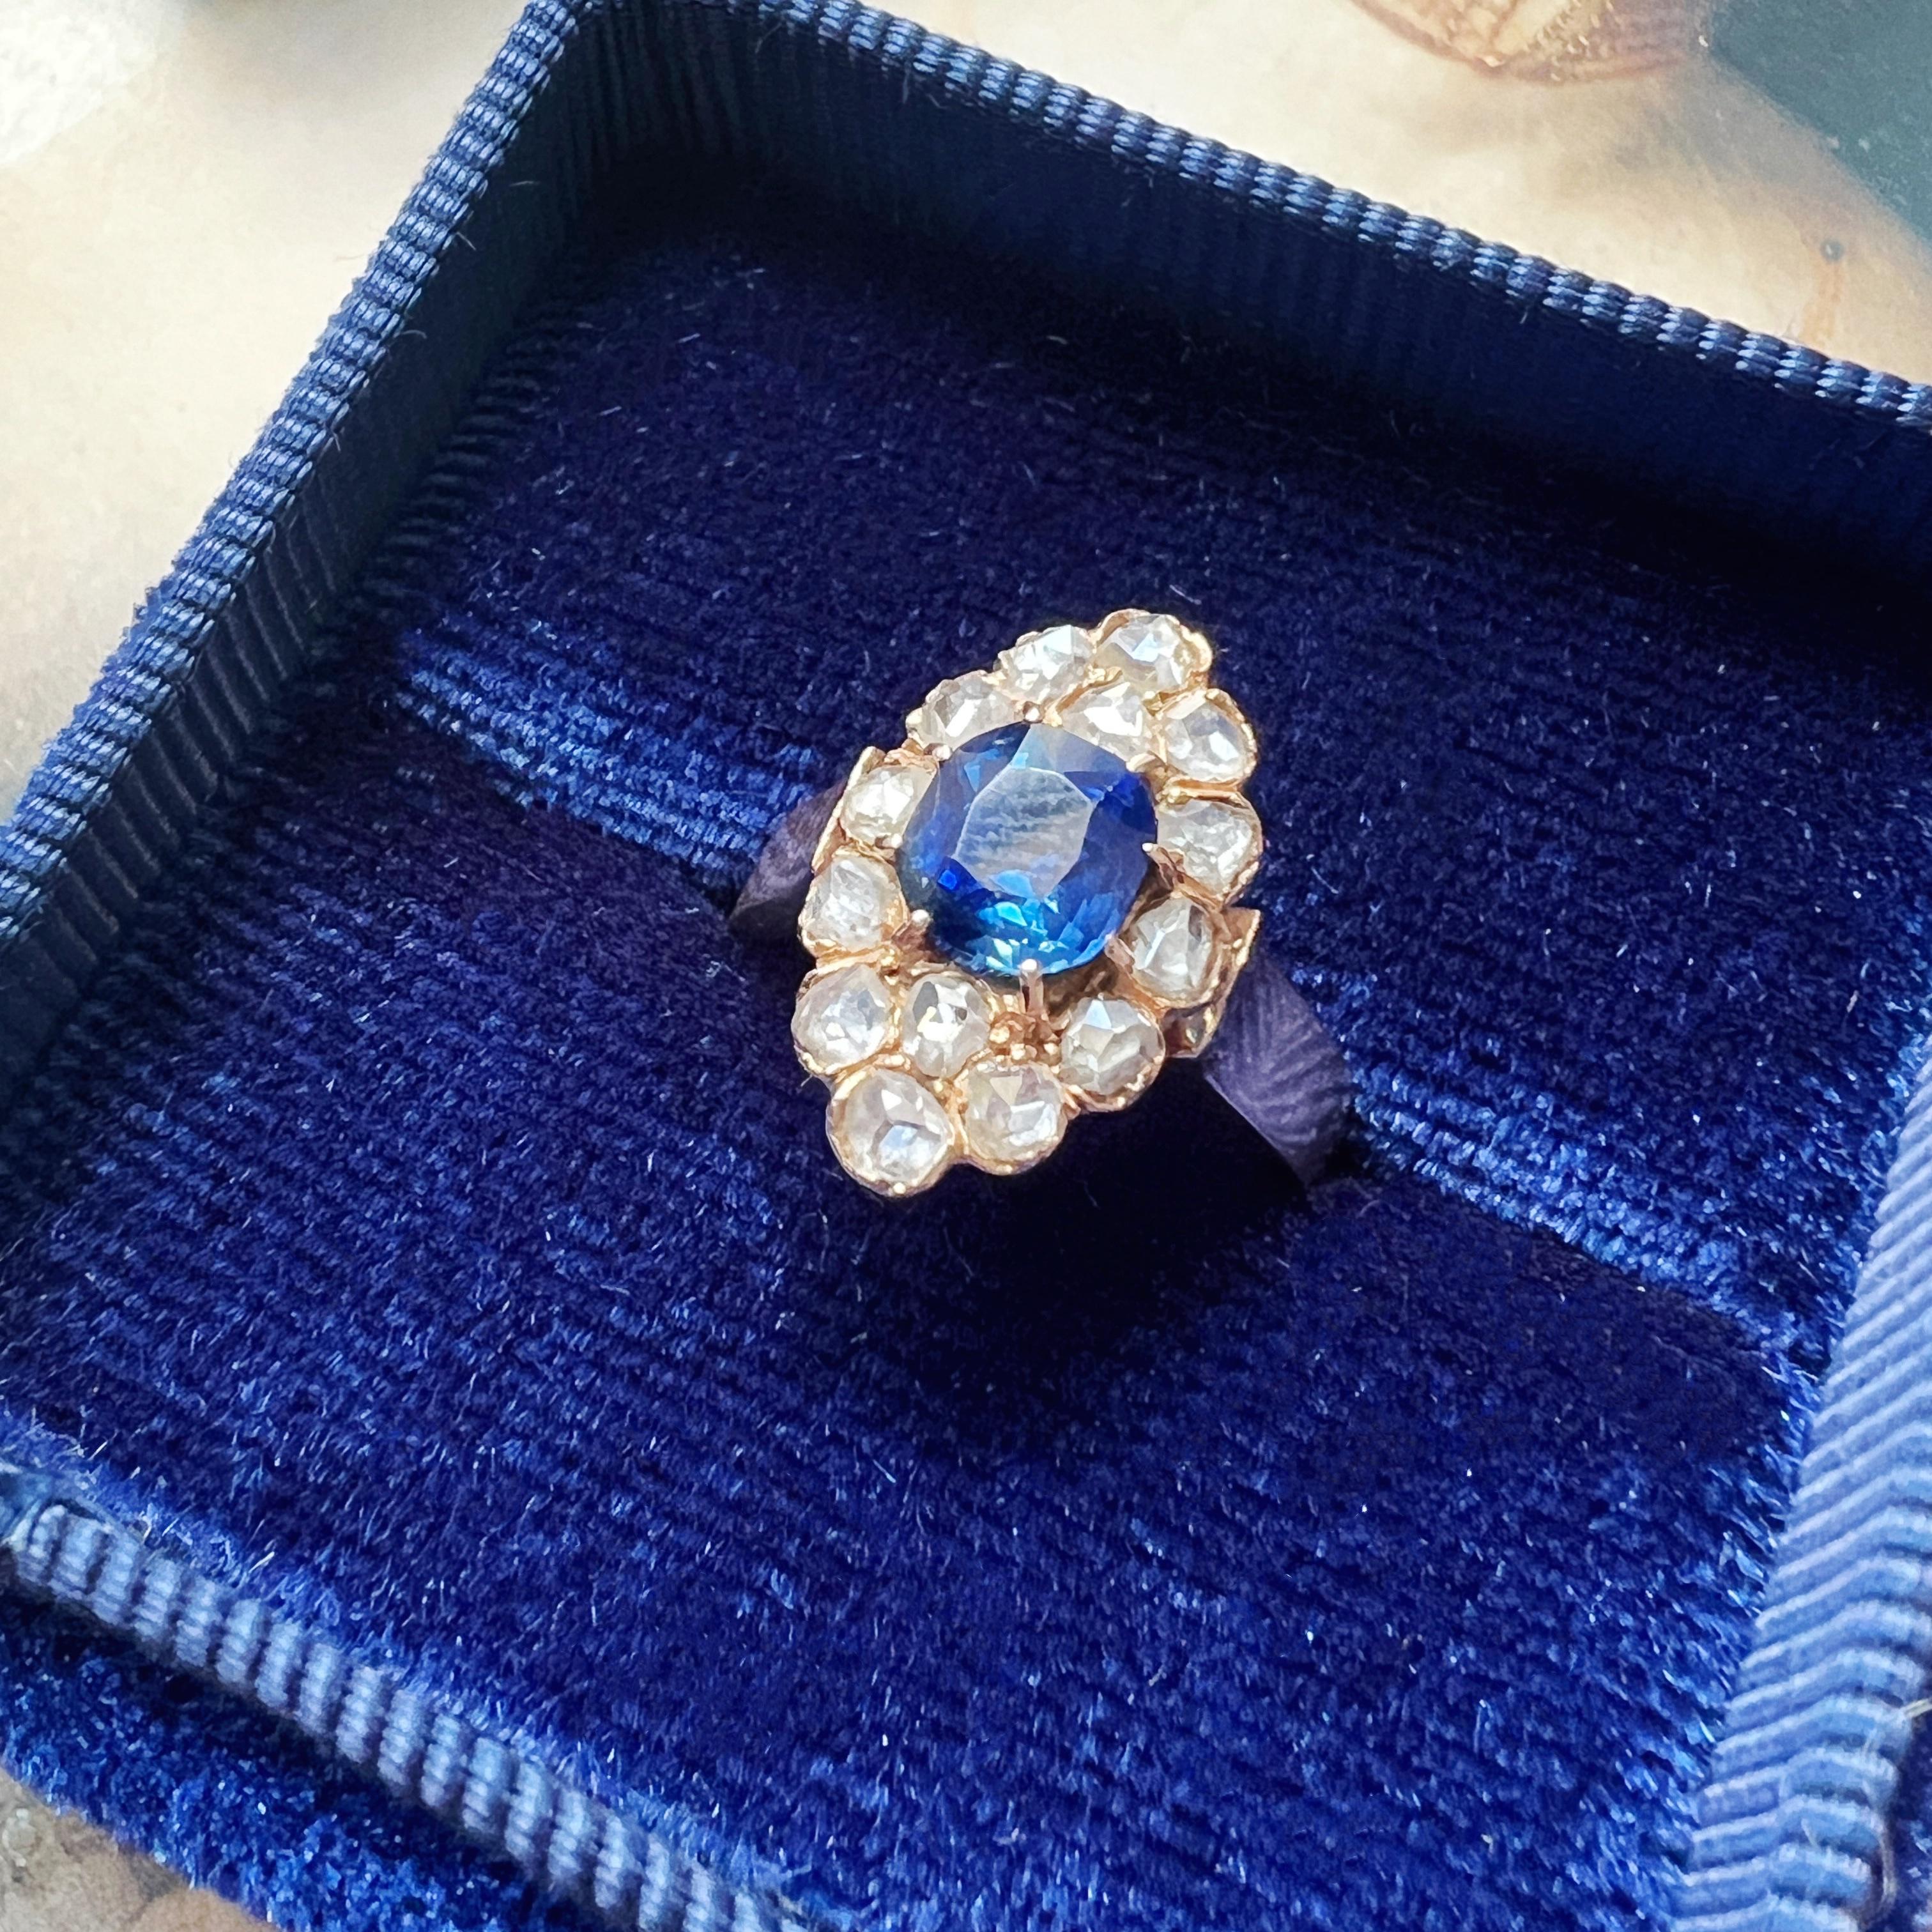 Victorian Antique LFG certified natural unheated blue sapphire diamond marquise ring